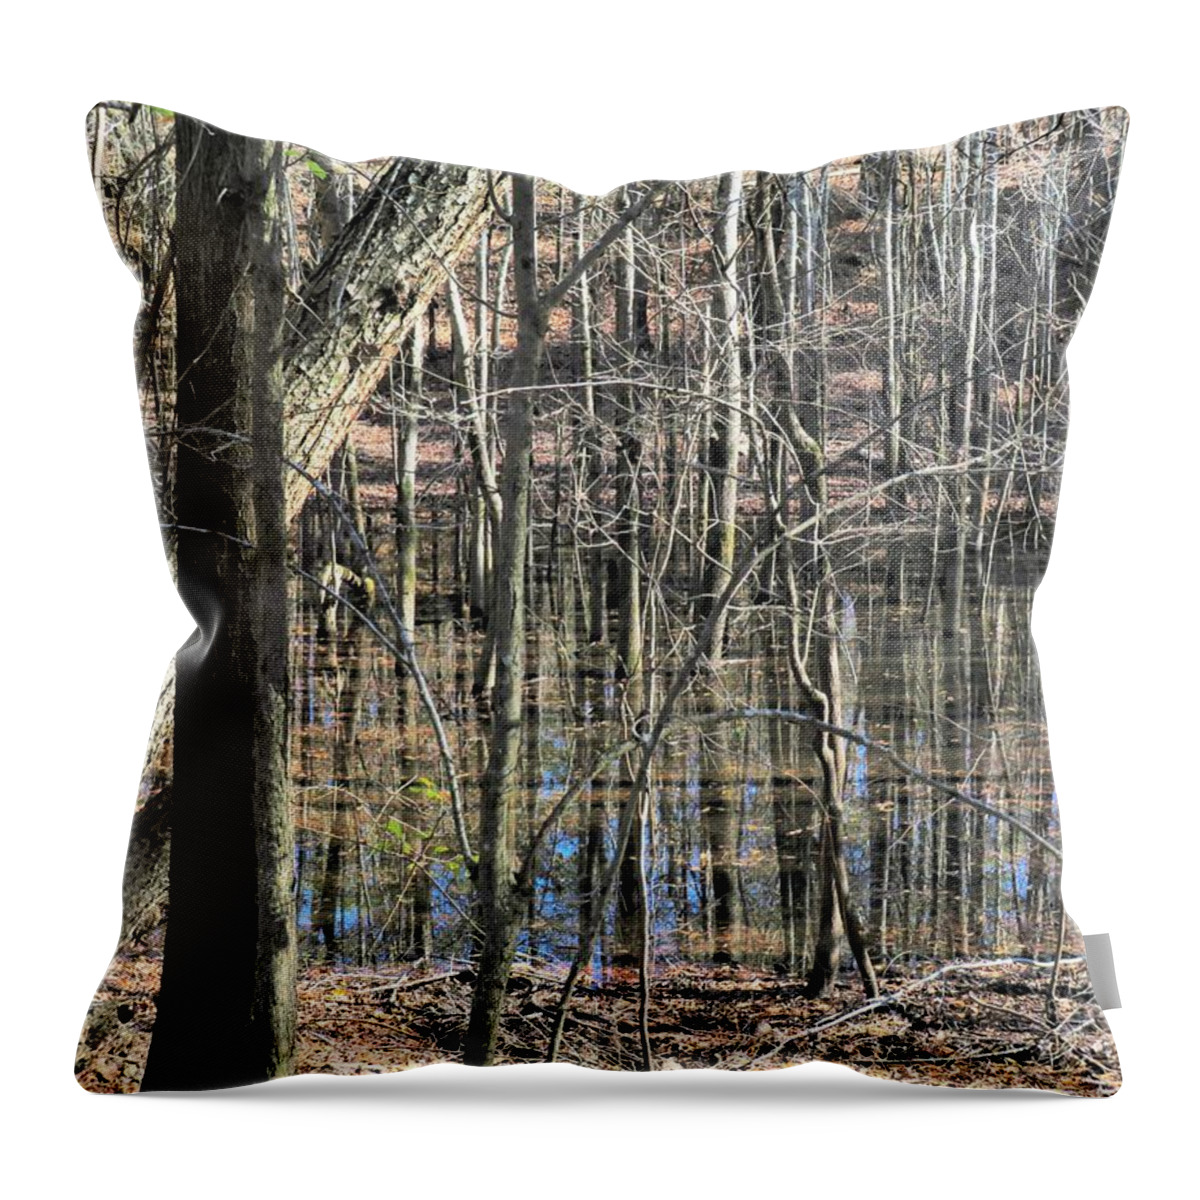 Trees Throw Pillow featuring the photograph Neverending Trees by Ed Williams